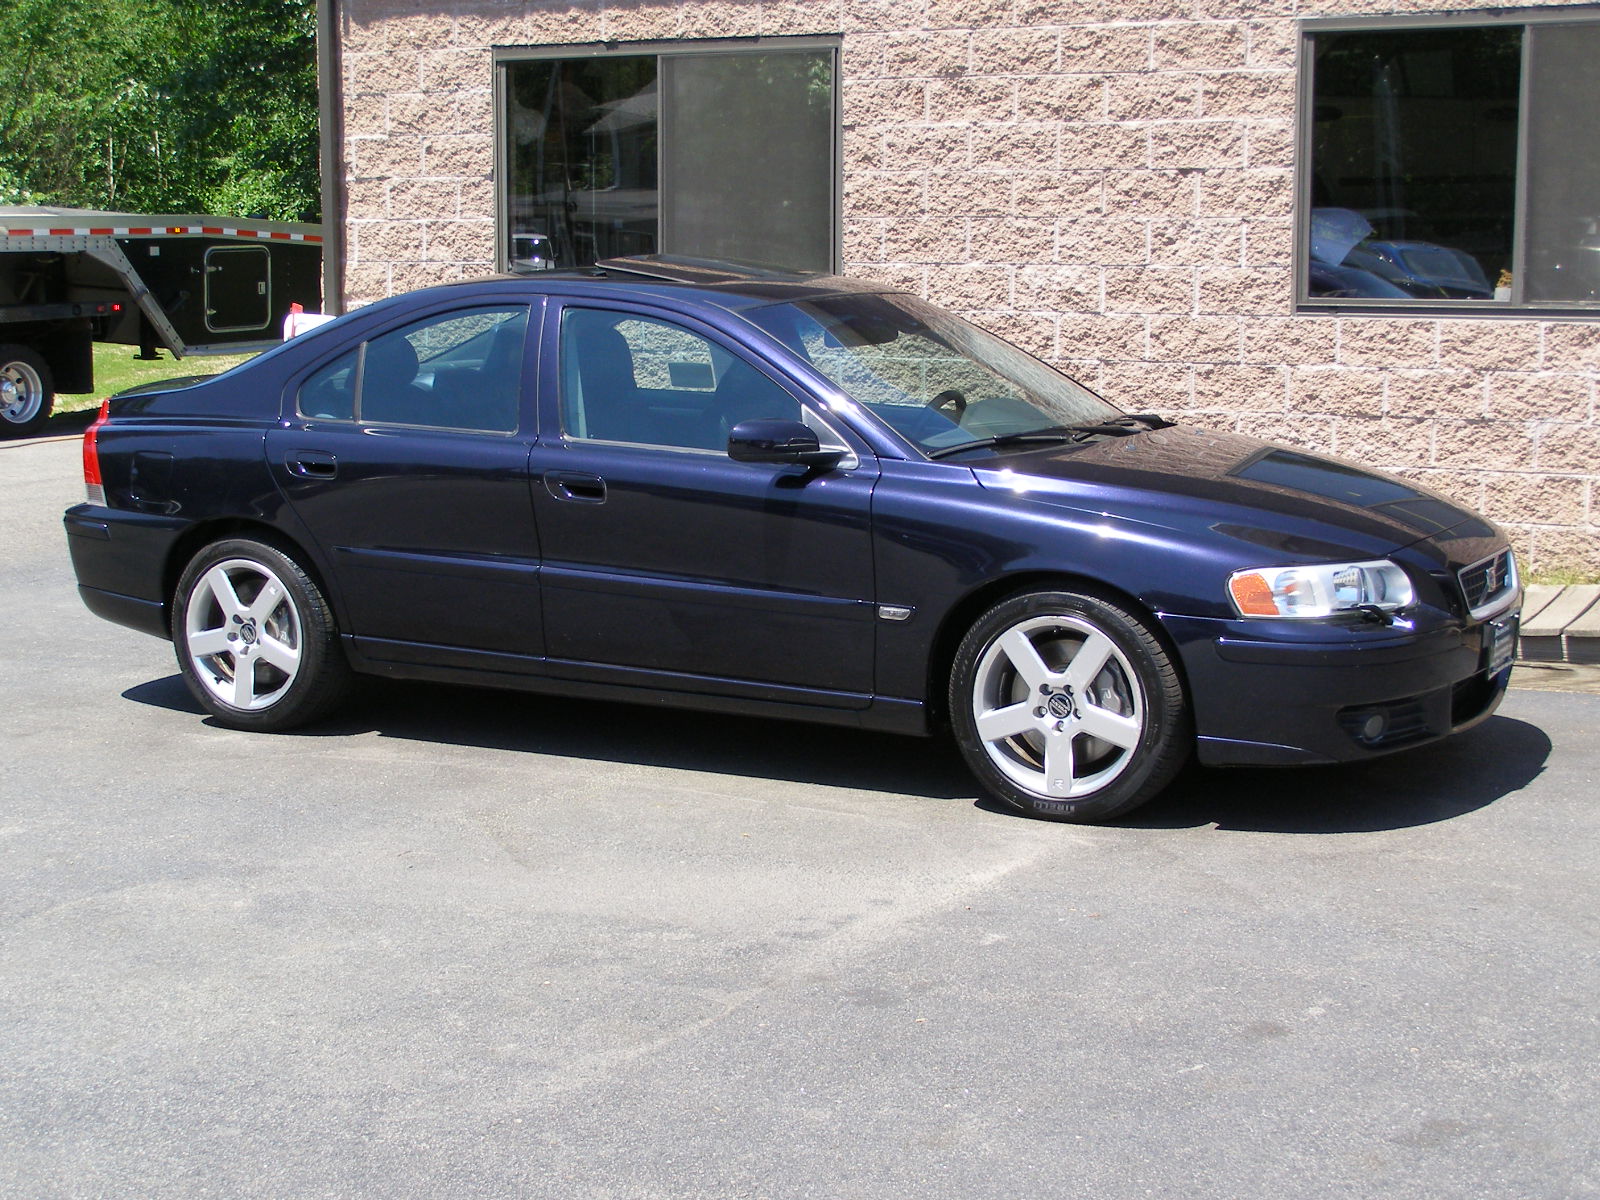 Volvo S60 R AWD - cars catalog, specs, features, photos, videos, review,